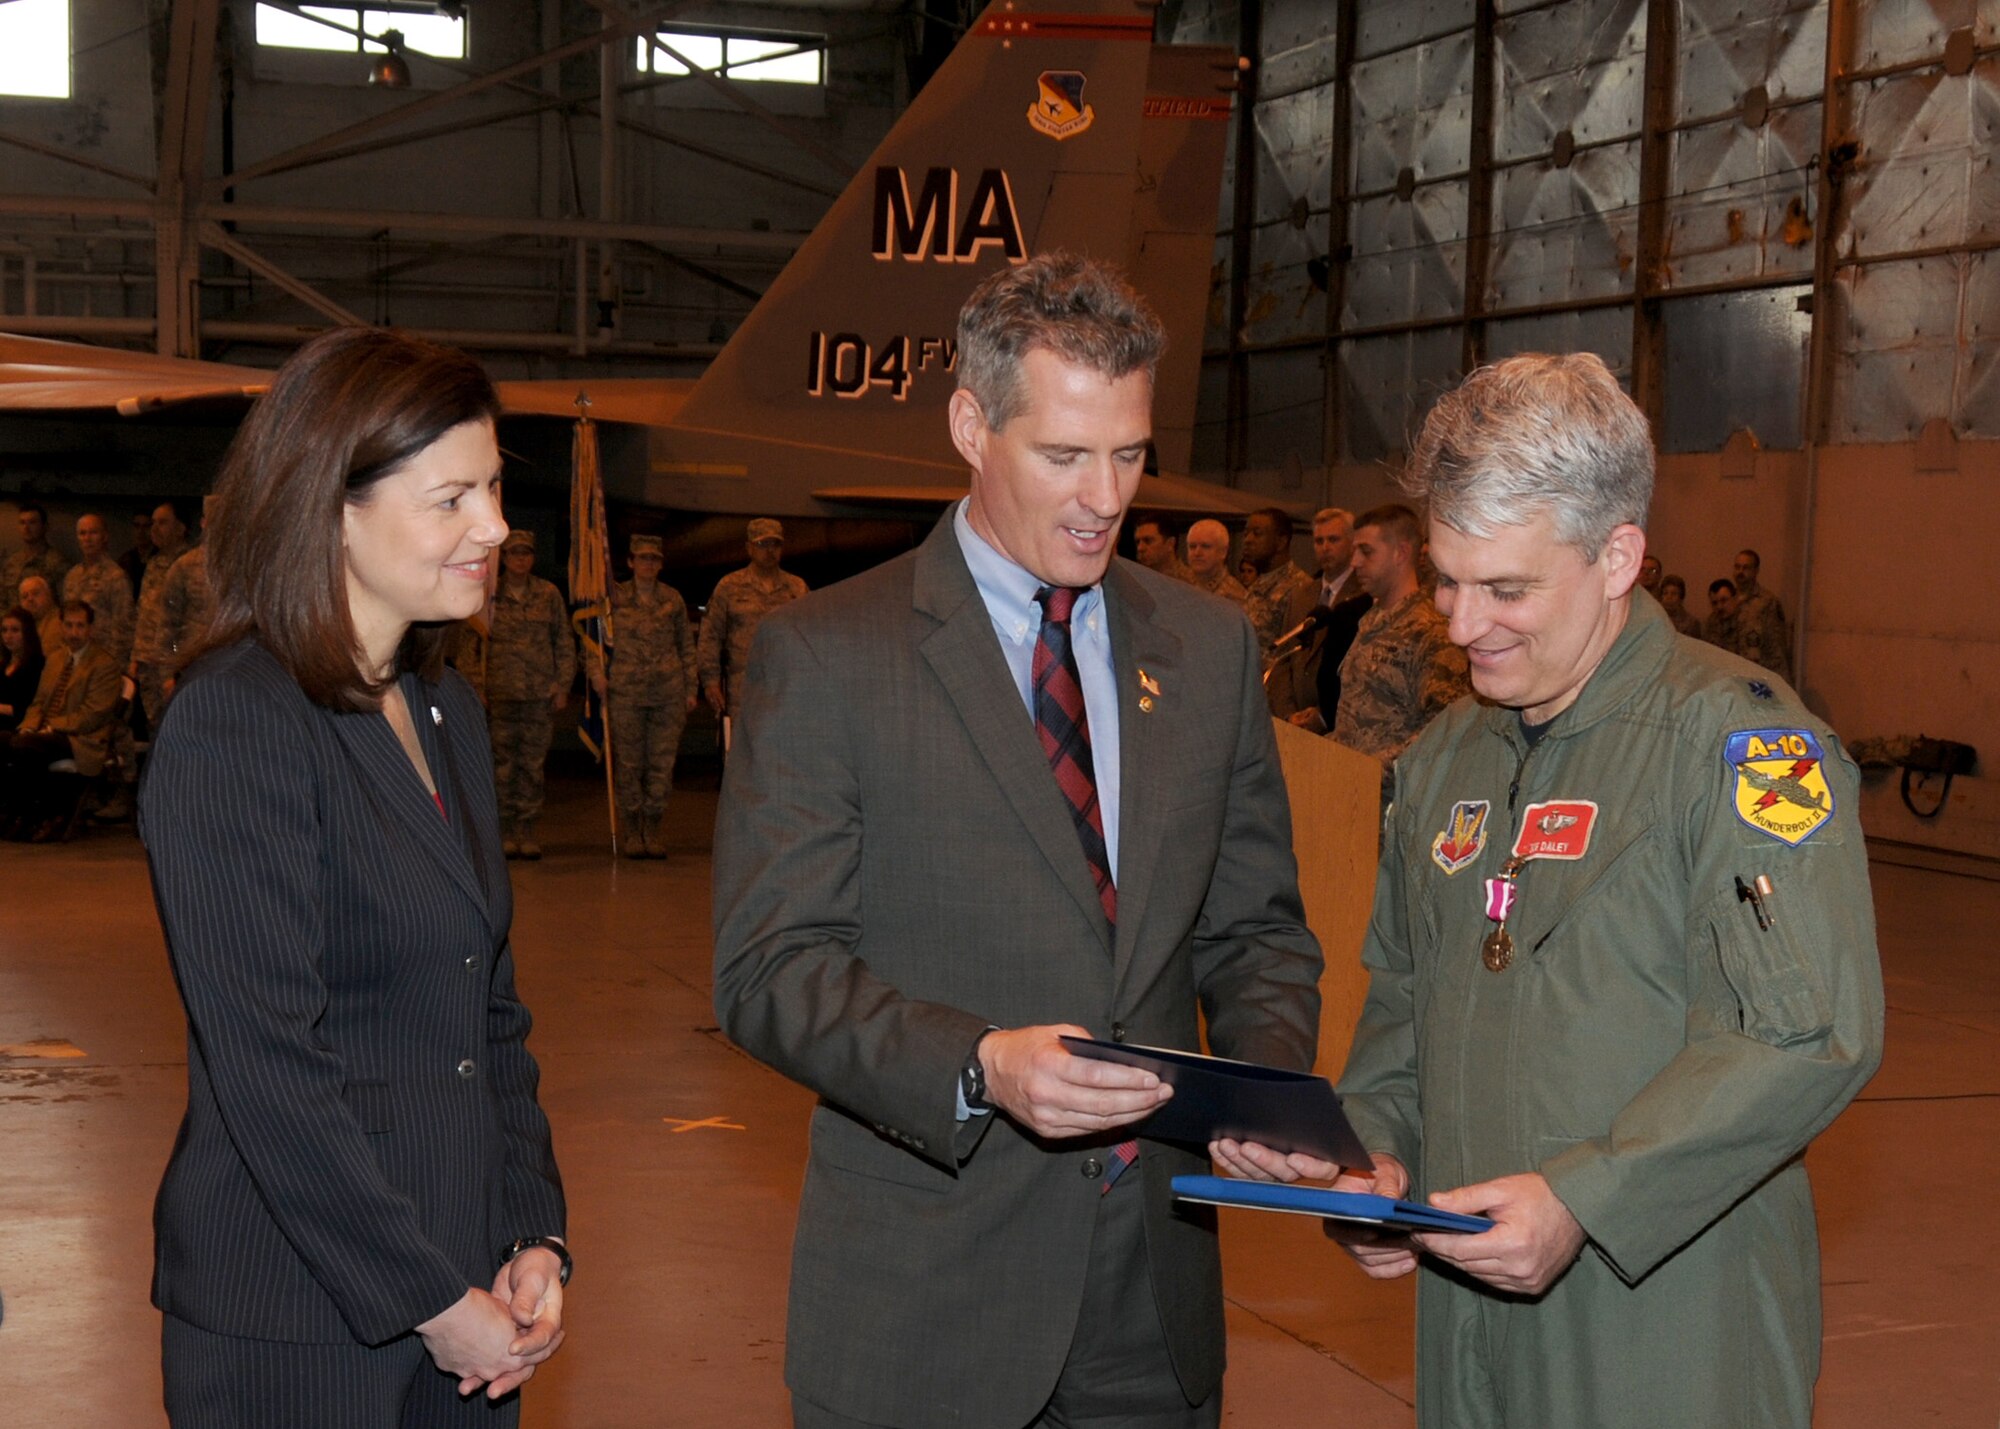 On March 3rd, 2012 Lieutenant Colonel Joseph Daley receives a Meritorious Service Medal and a Retirement certificate from Senator Scott Brown and his wife Senator Kelly Ayotte during a Commanders Call that was held in the main hanger at the 104th Fighter Wing Barnes Air National Guard Base, Westfield, MA. Lieutenant Daley completed 22 years of service.  (Air National Guard photo by Technical Sergeant Melanie J. Casineau)